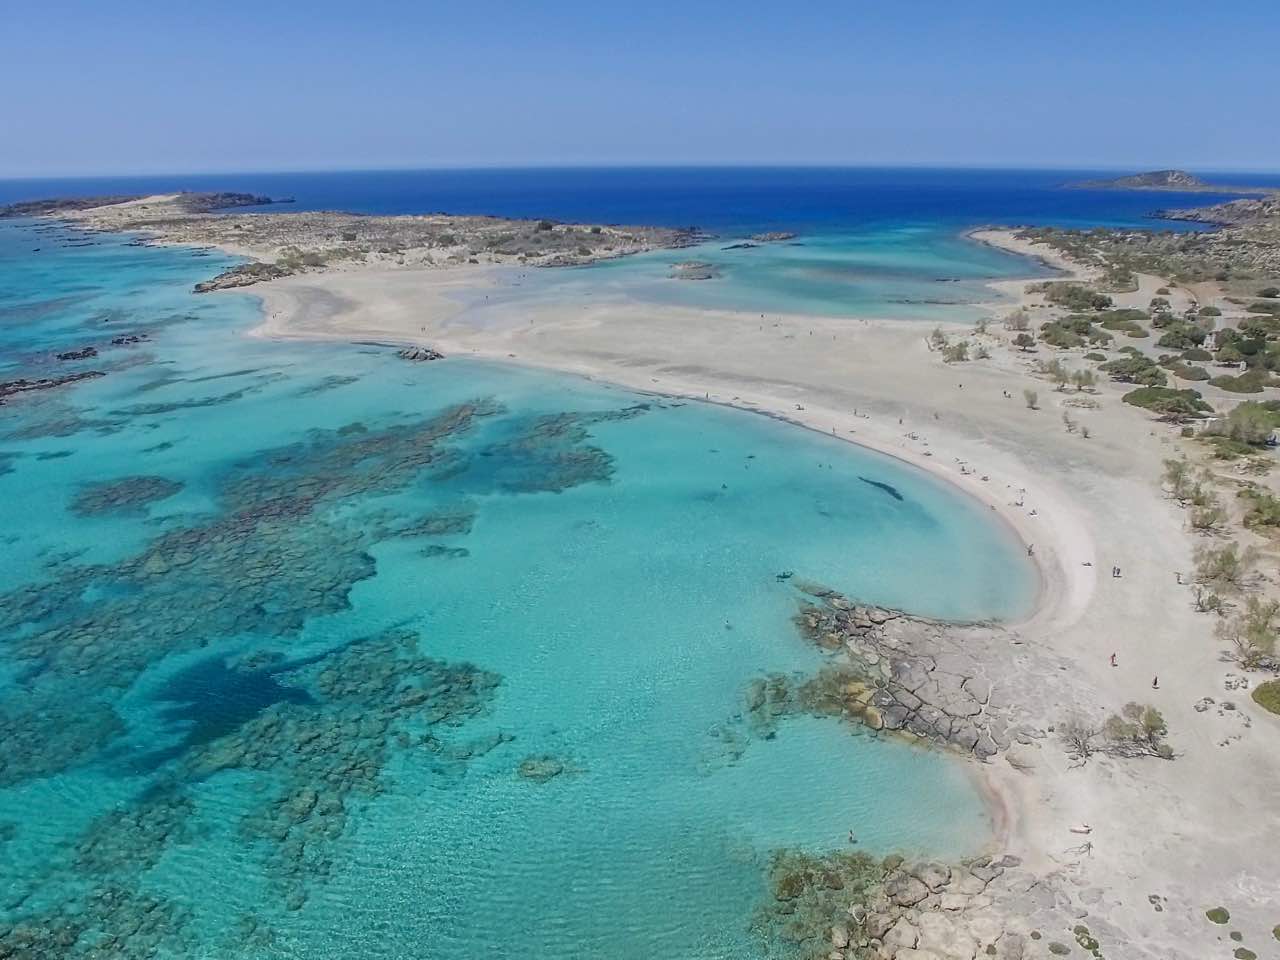 tailor made tours crete, tailor made tours chania crete, tailor made tours rethymno crete, tailor made tours heraklion crete, tailor made tours elounda village, traditional villages, culture history tours, social tours, historical tours, samaria gorge, chania town